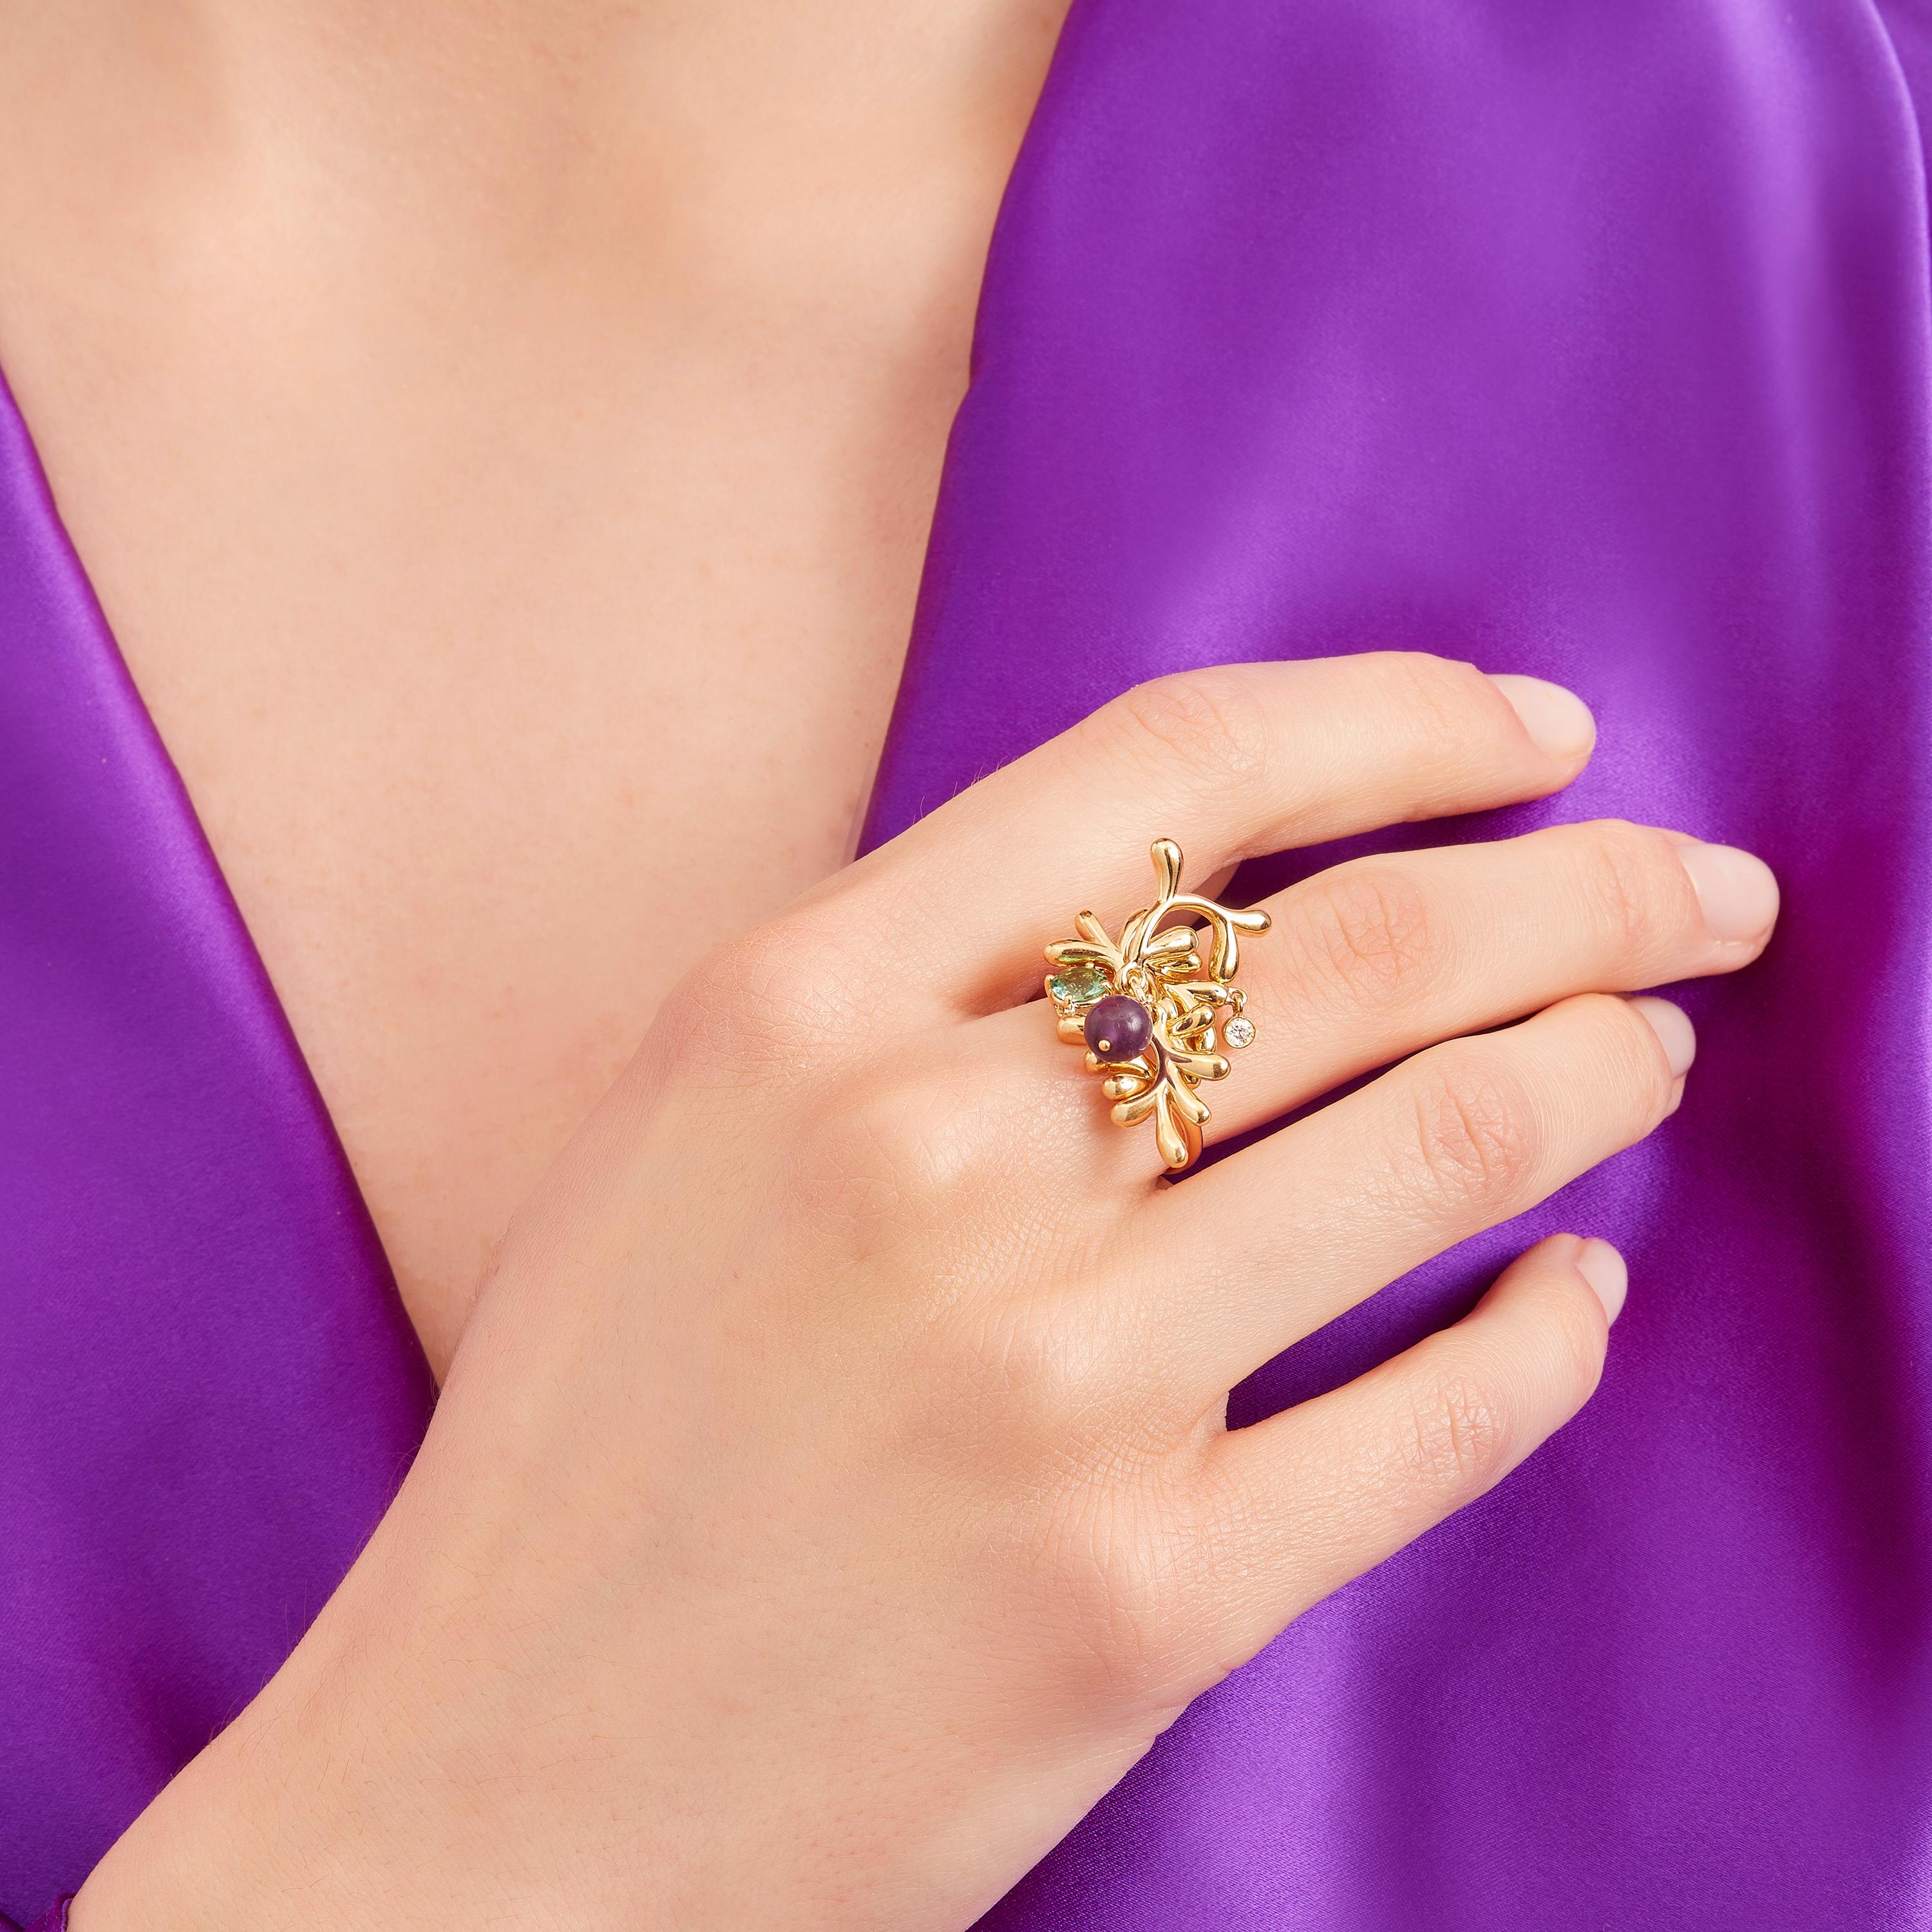 Springing forth from a lush magical wilderness is the JungleRemix ring with its clusters of gold leaves with well-rounded tips jingling and jangling to mimic the swaying movements of exotic flora in the heart of the rainforest. Cast as miniaturized